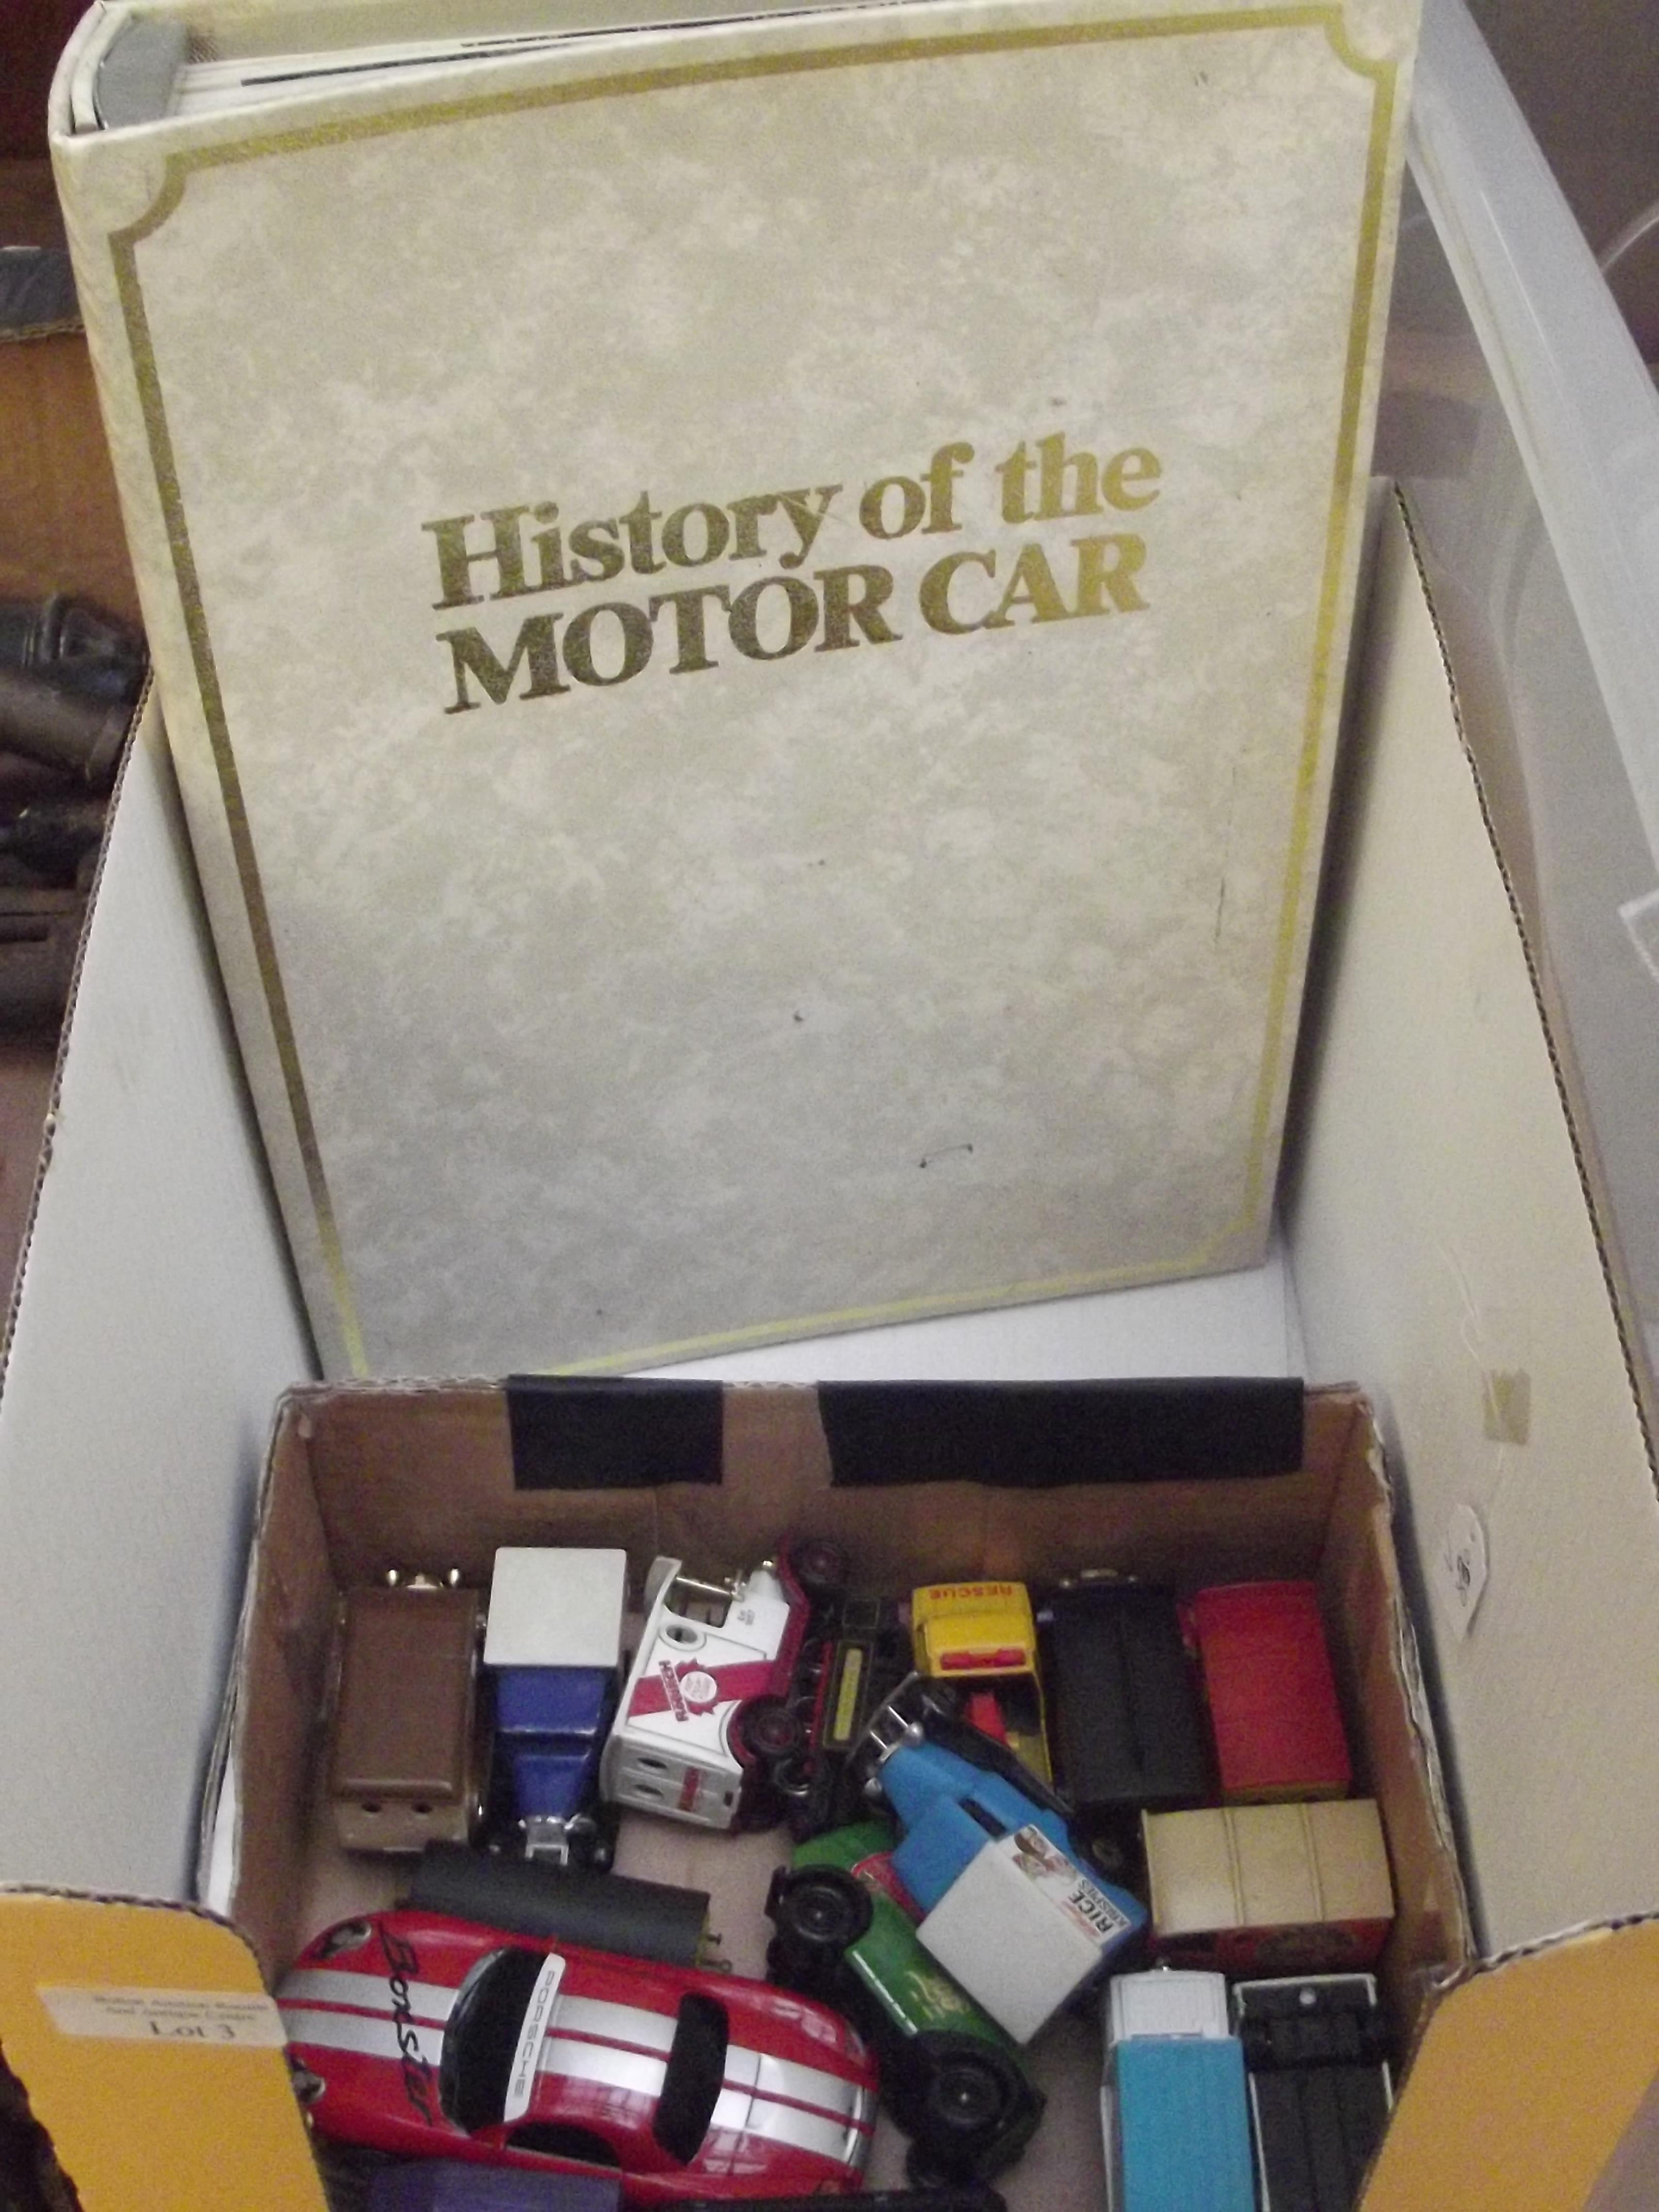 Model cars and car books